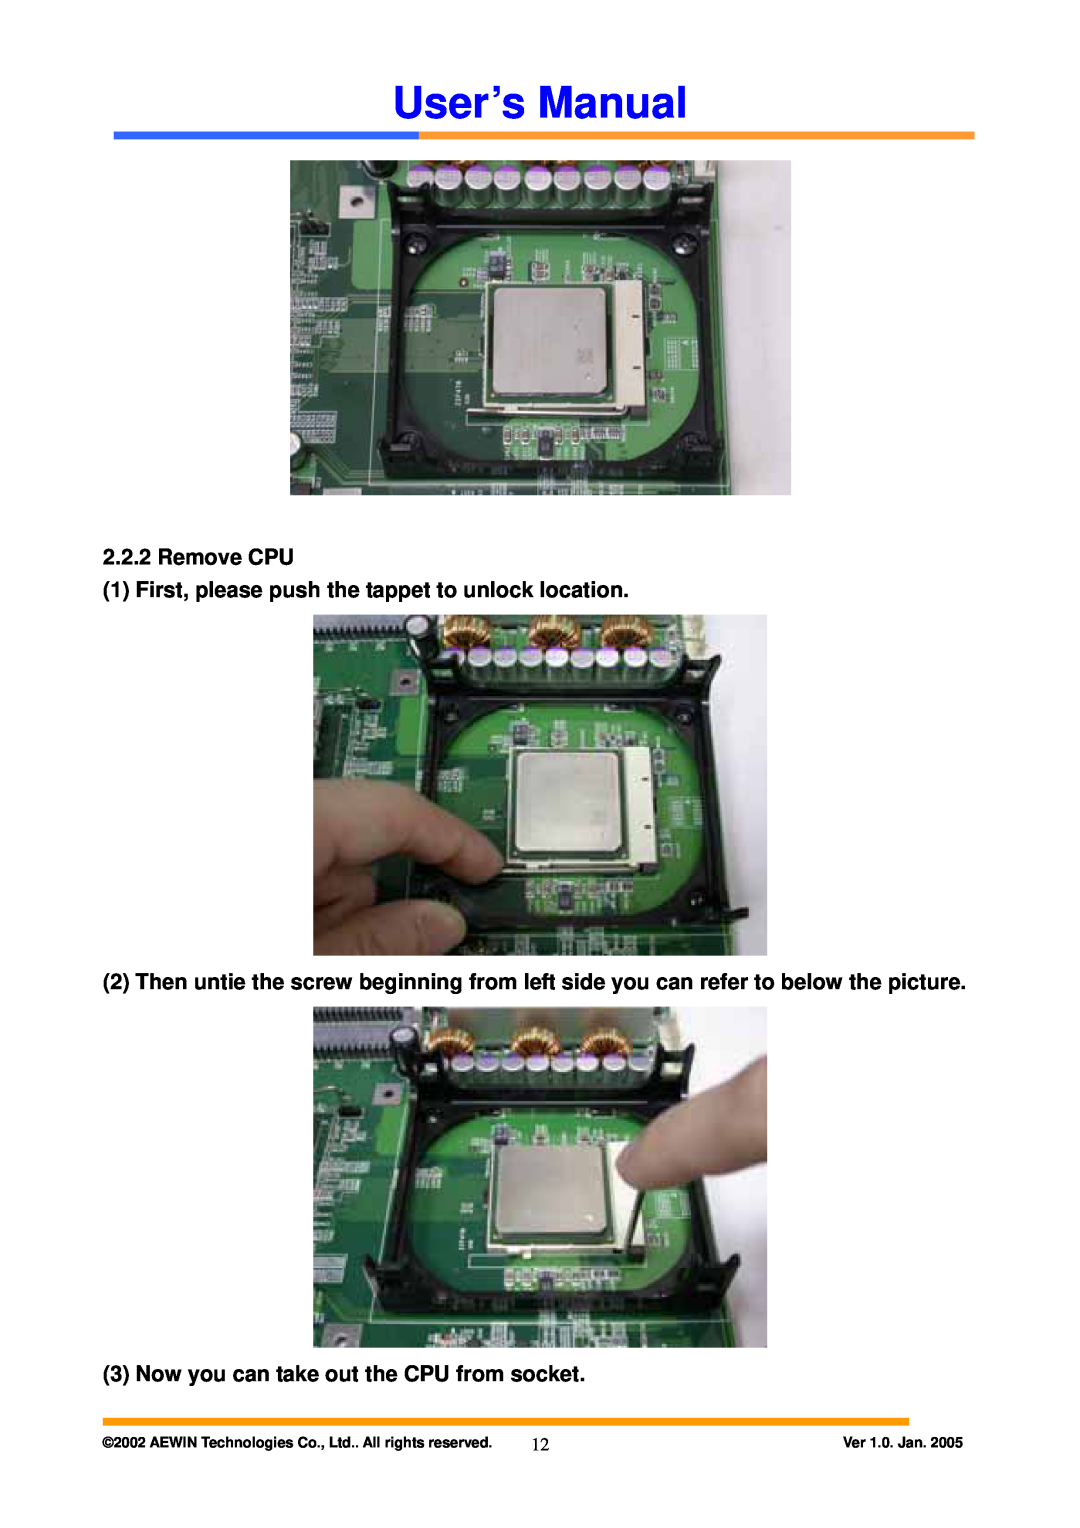 Intel AW-A795 Remove CPU 1 First, please push the tappet to unlock location, Now you can take out the CPU from socket 